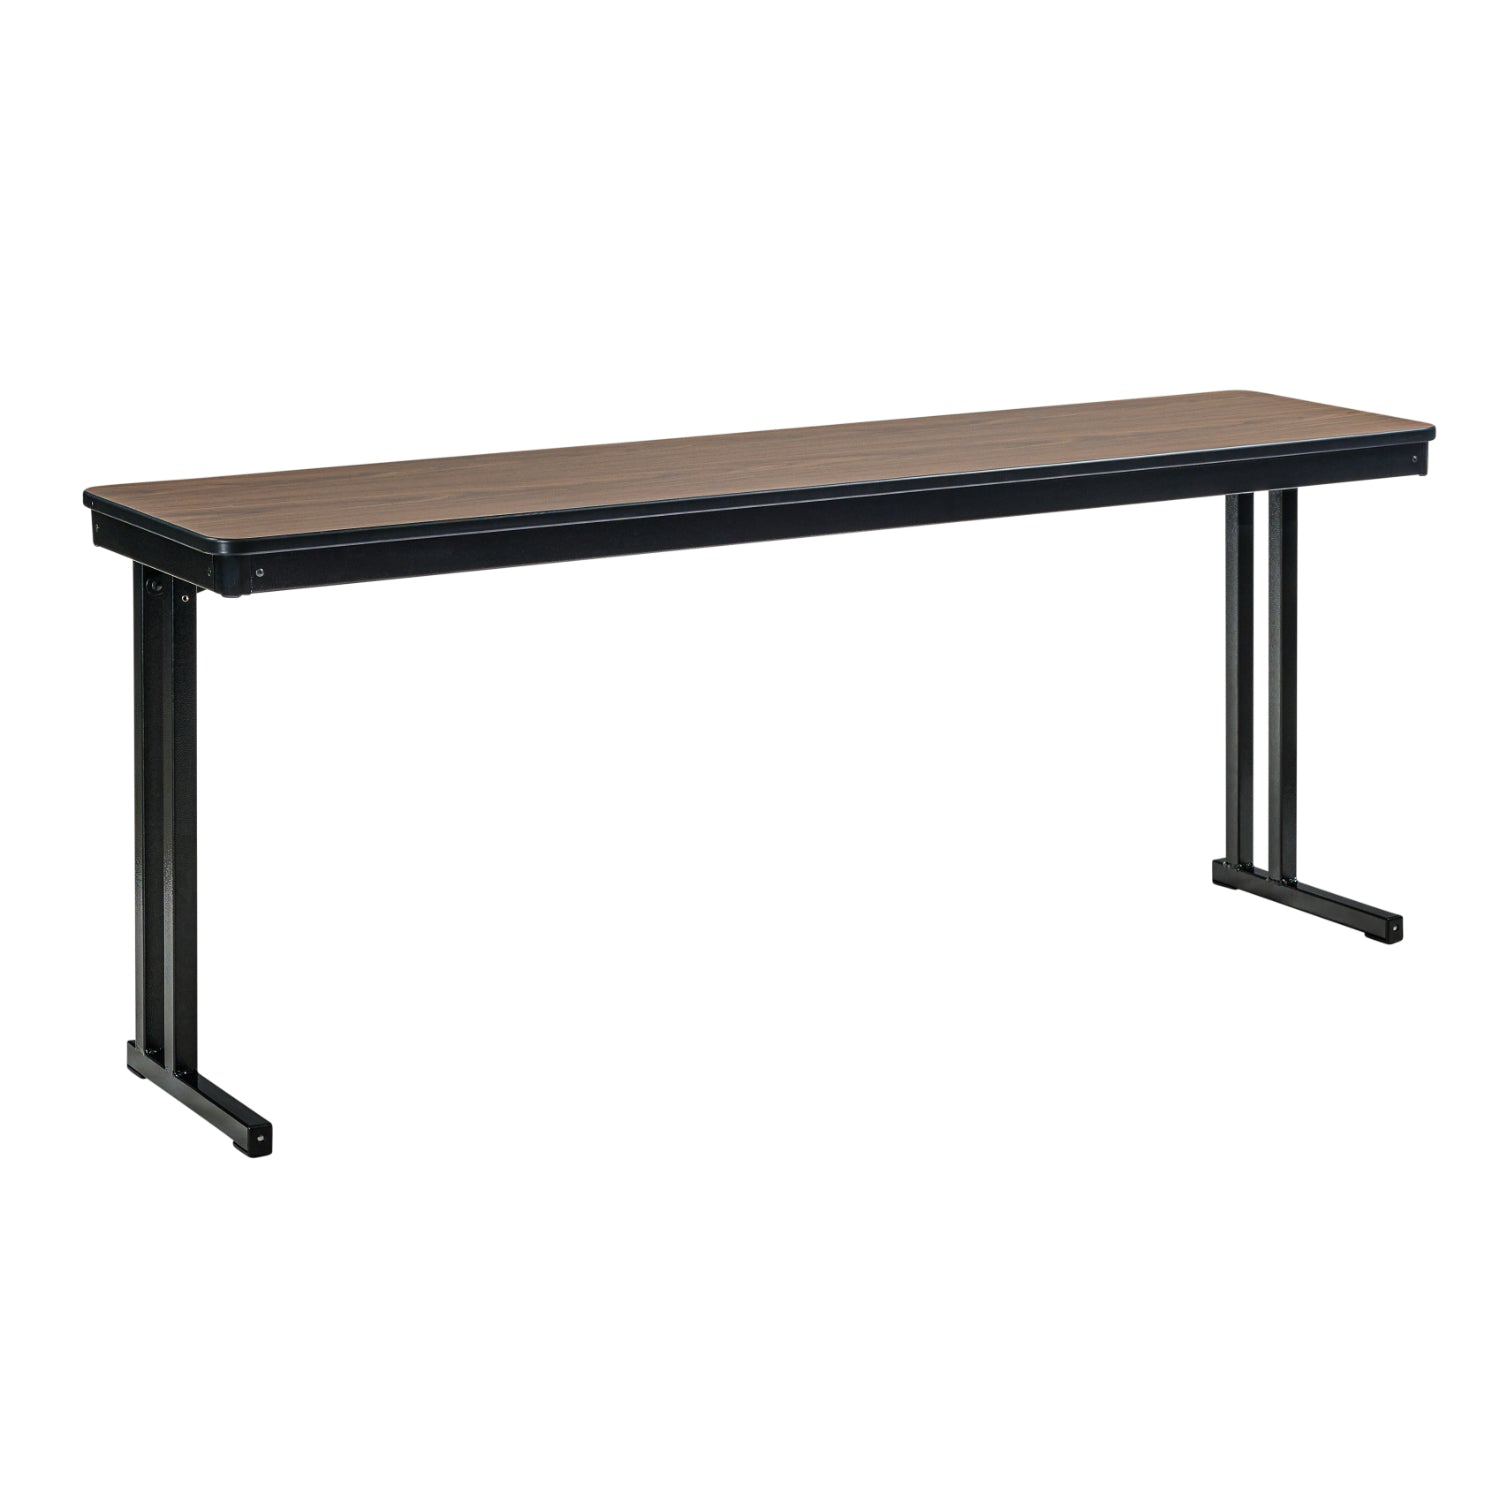 Max Seating Folding Training and Seminar Table with Cantilever Legs, 24" x 96", High Pressure Laminate Top with Plywood Core/PVC Edge Banding